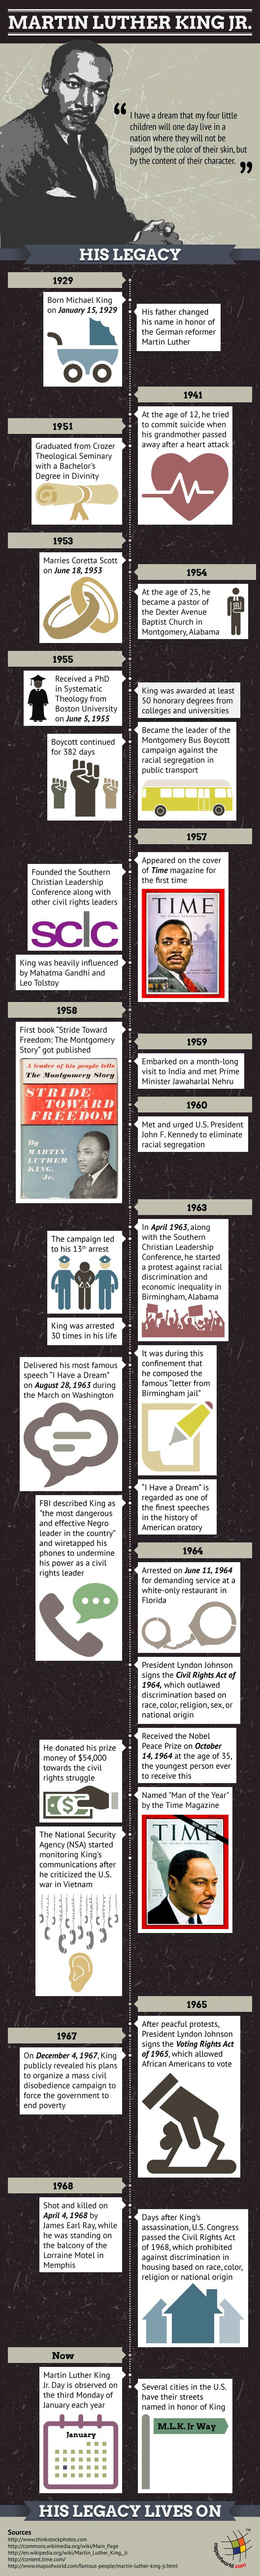 Infographic on Martin Luther King Jr. 